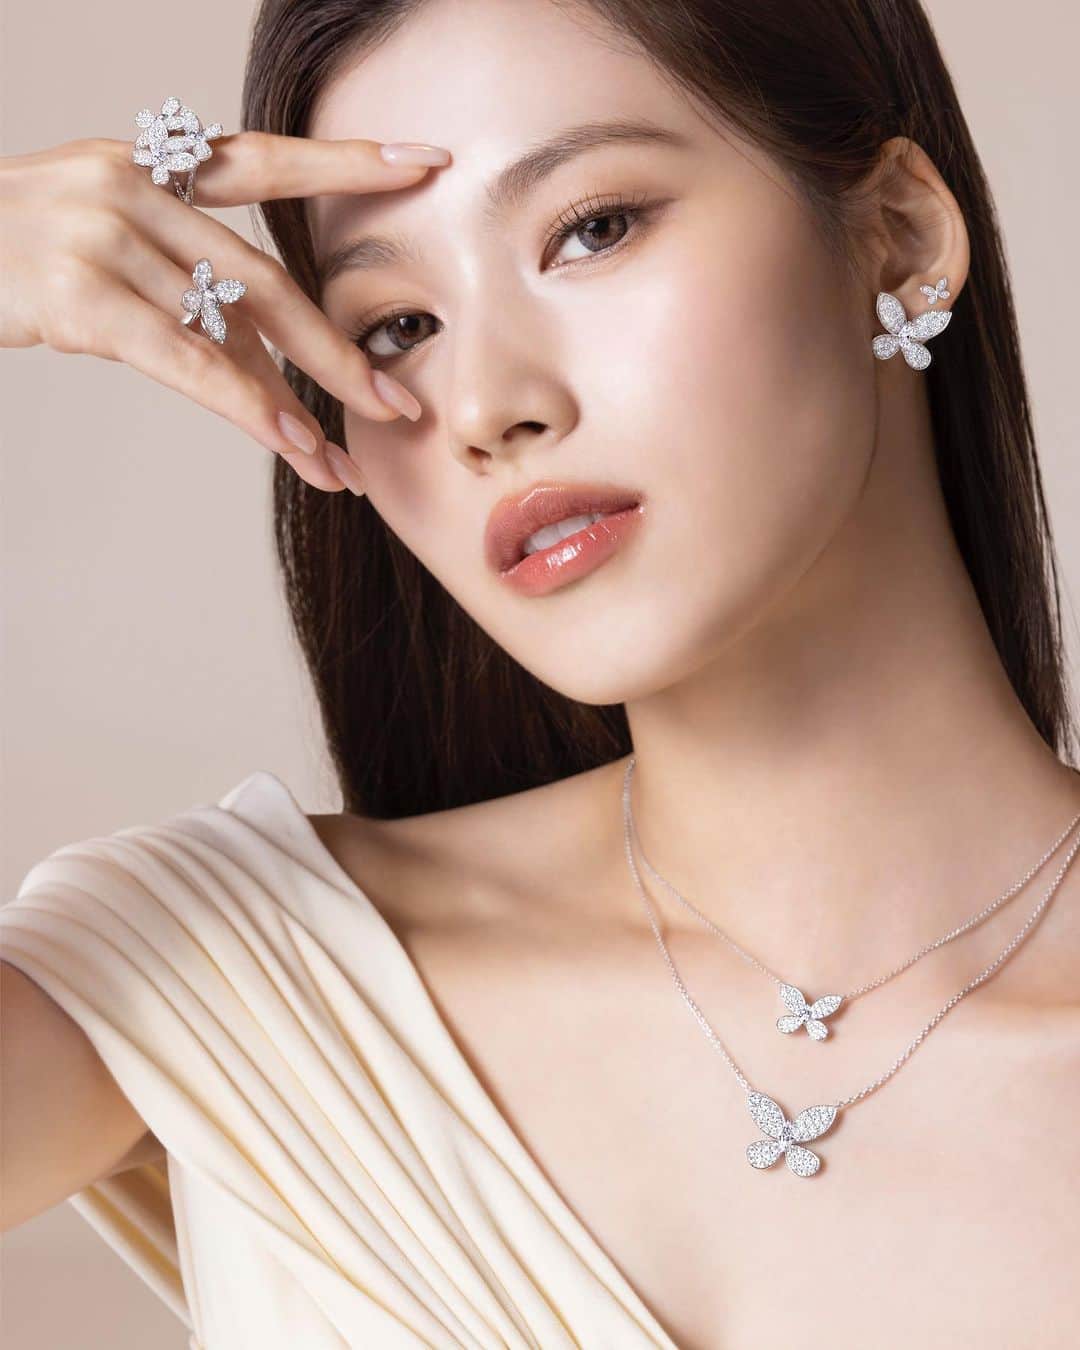 Graffのインスタグラム：「Captivating and alluring. Sana embodies the transformative power of jewels from Graff’s Butterfly collection, reminding her of her strength, freedom and opportunity to fly.  SANAが体現する輝く未来へと導くジュエリーコレクション、ザ グラフ バタフライ。優美なバタフライの煌めきが身に着ける人に力強さや自由、夢に向かって飛び立つ勇気を与えてくれます。  #GraffDiamonds #GRAFFxSANA #グラフ」